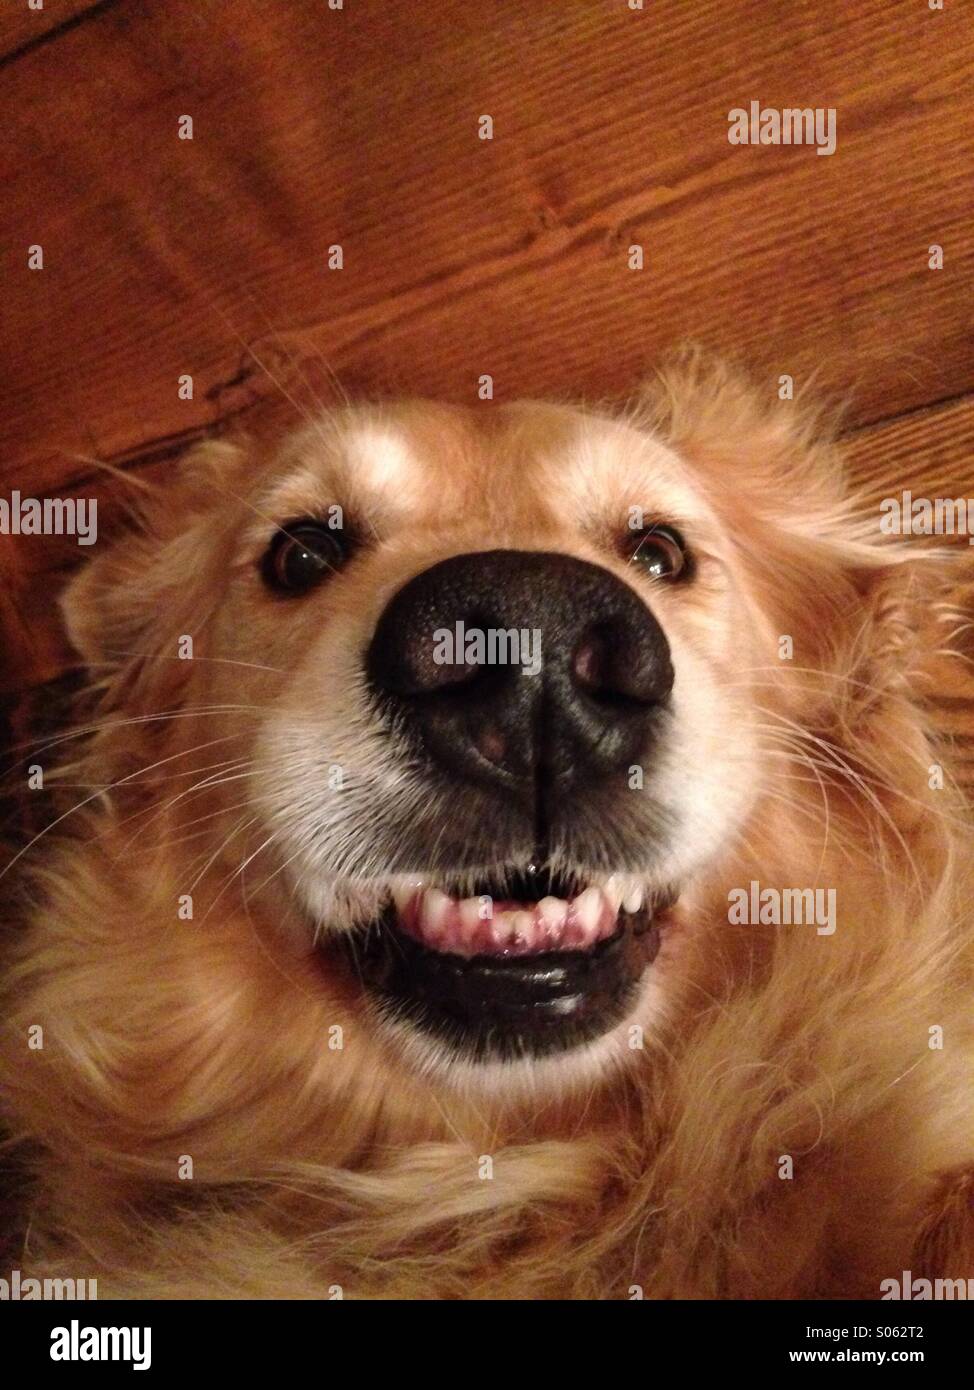 Silly dog Stock Photo